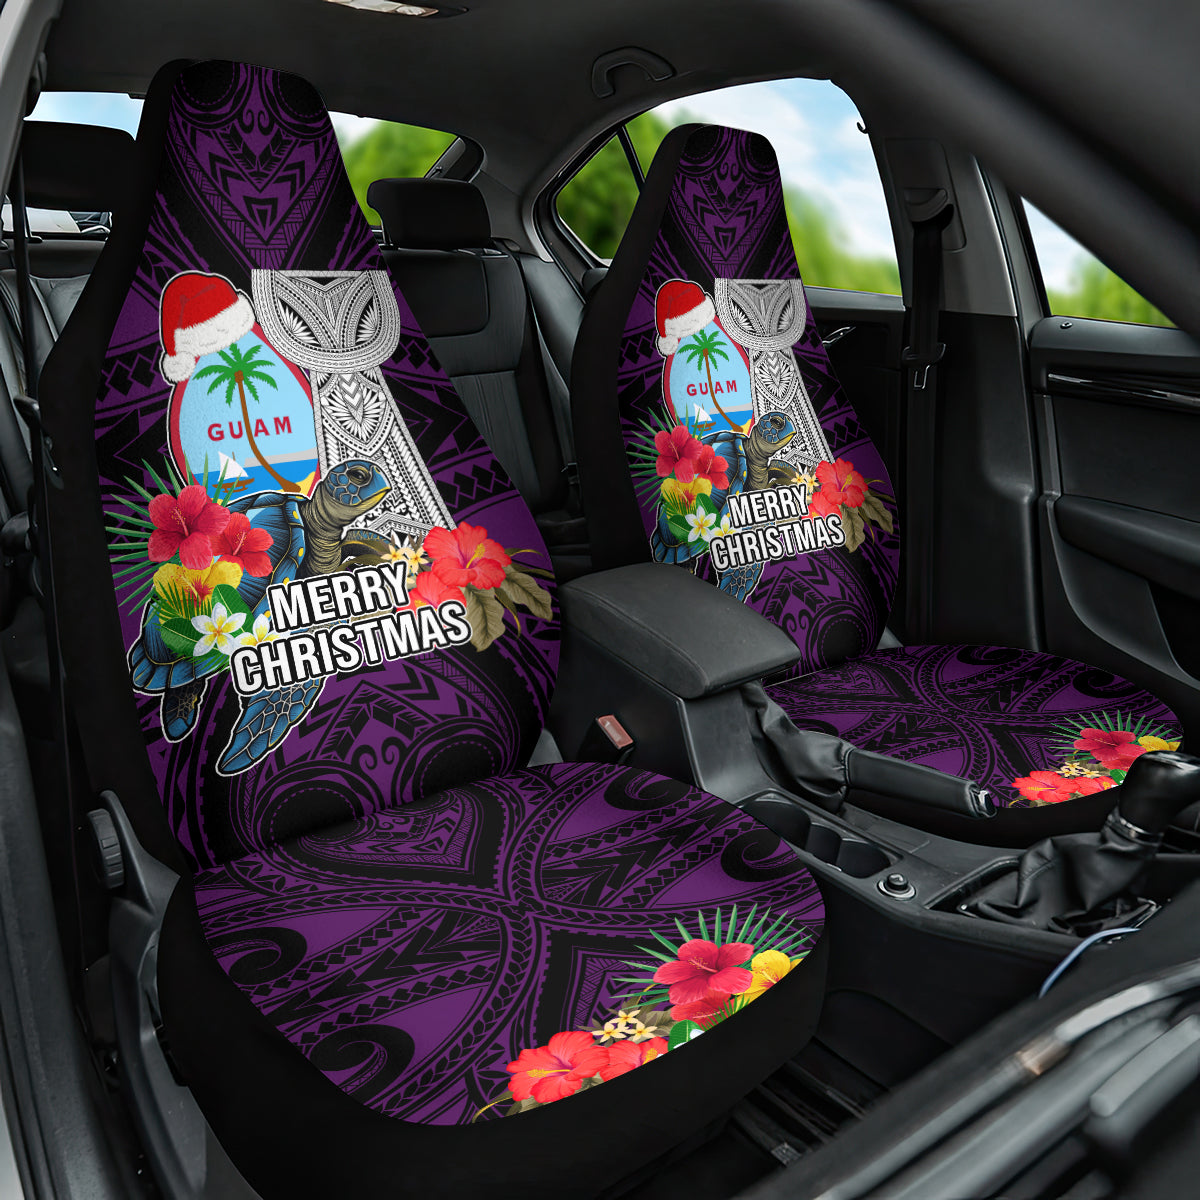 Guam Christmas Car Seat Cover Santa Gift Latte Stone and Sea Turle Mix Hibiscus Chamorro Pink Style LT03